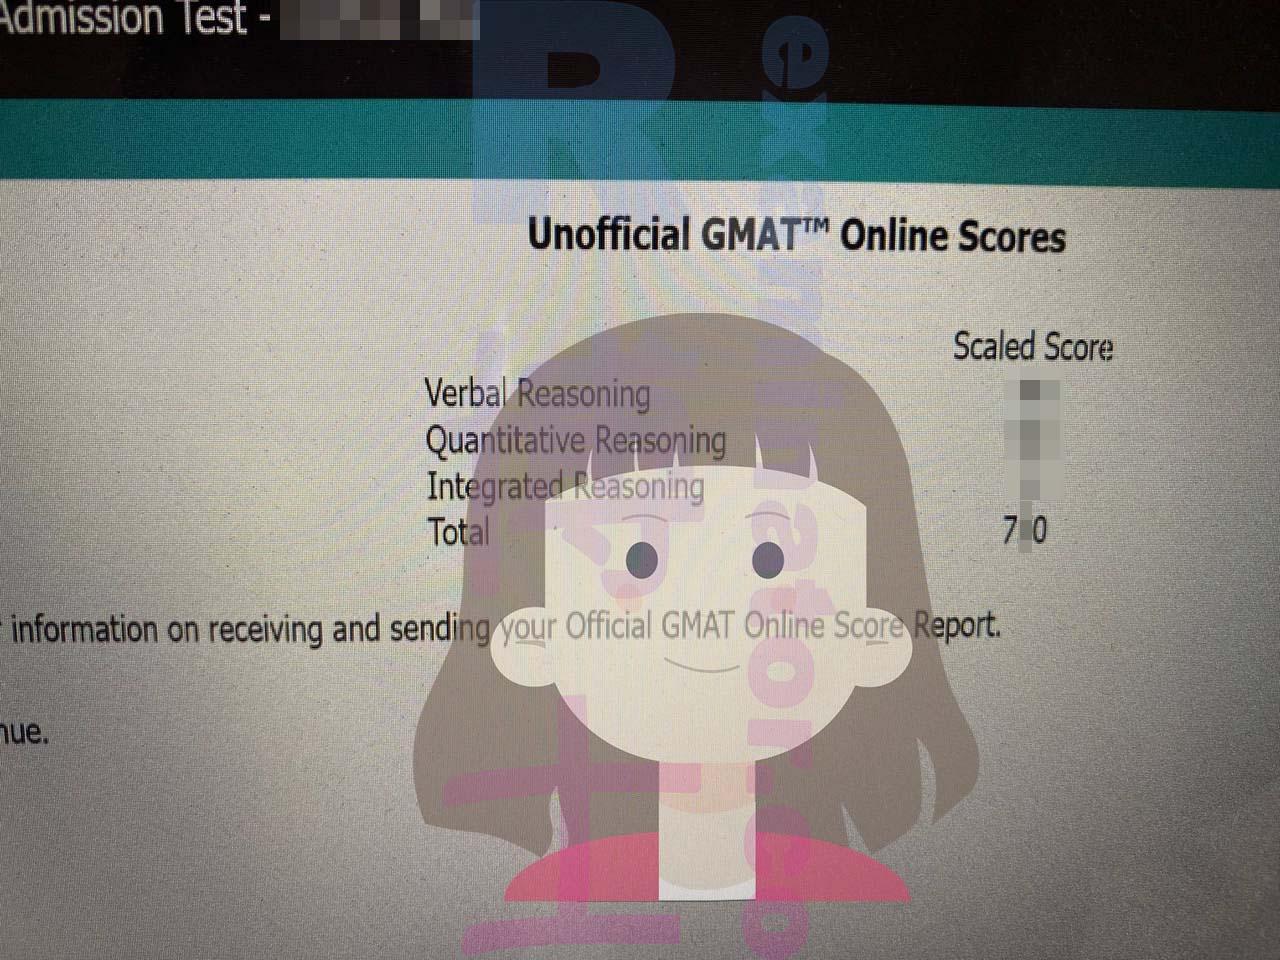 Score image for GMAT Cheating success story #509